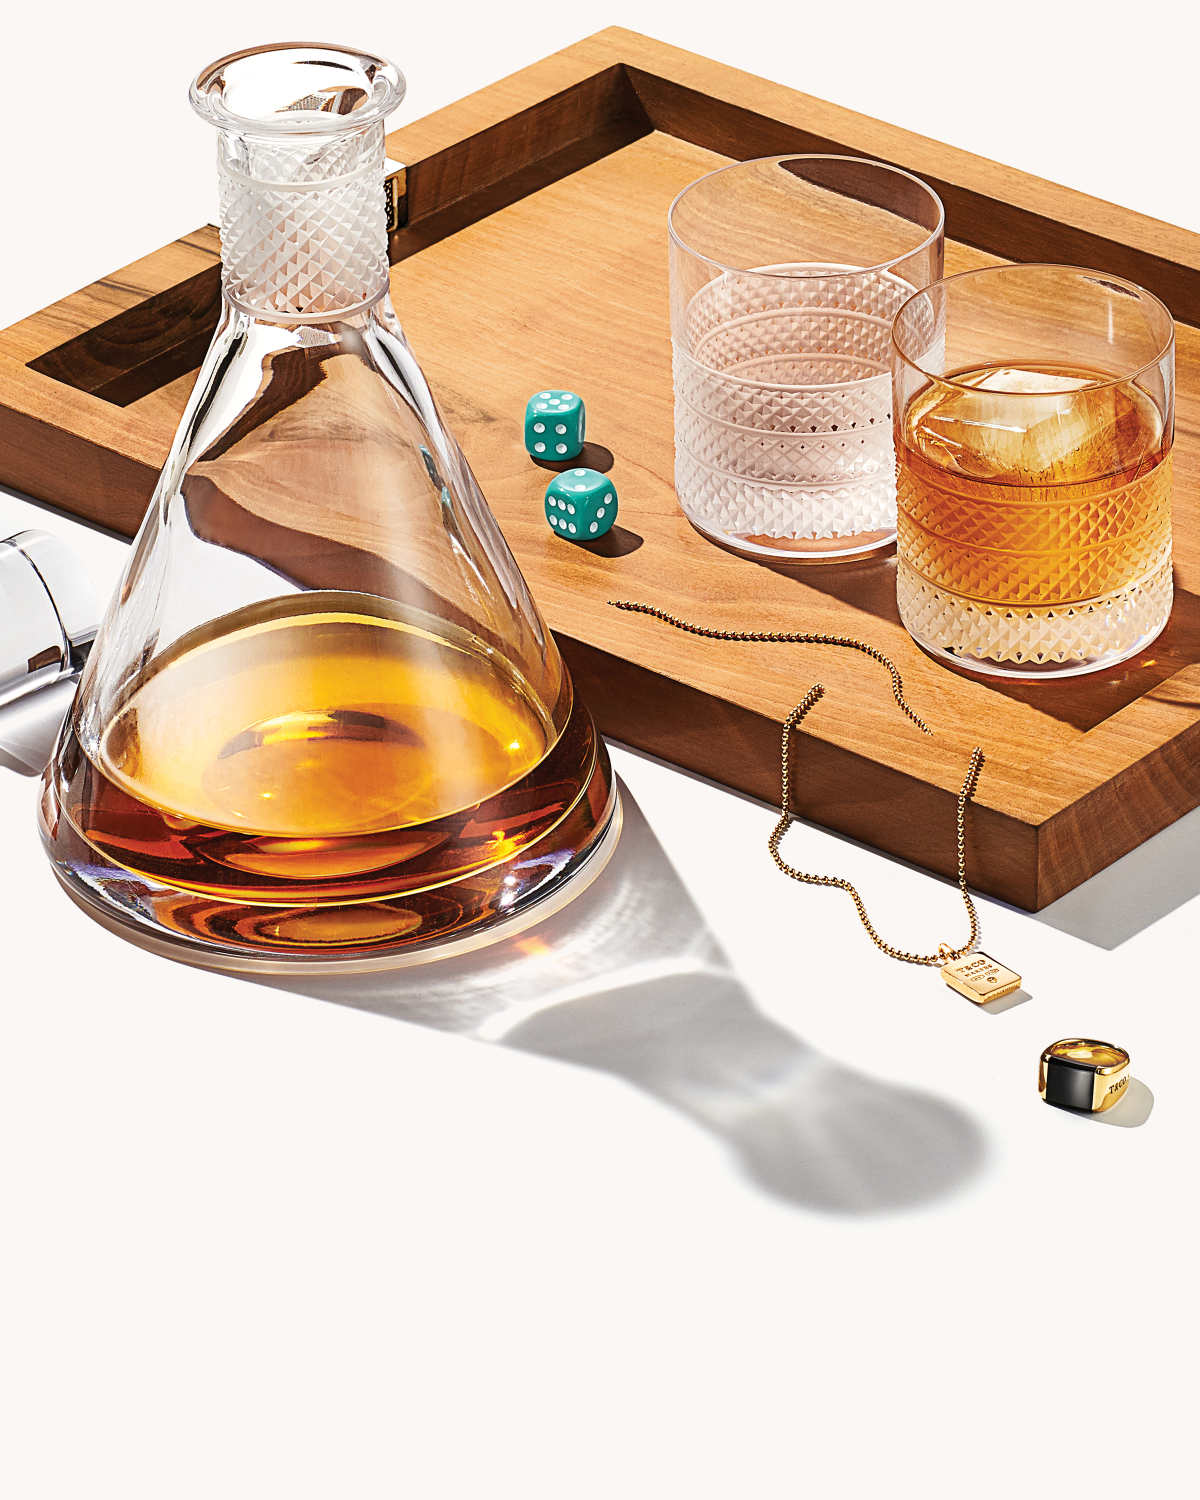 Tiffany & Co. Presents A Special Father's Day Gift Guide